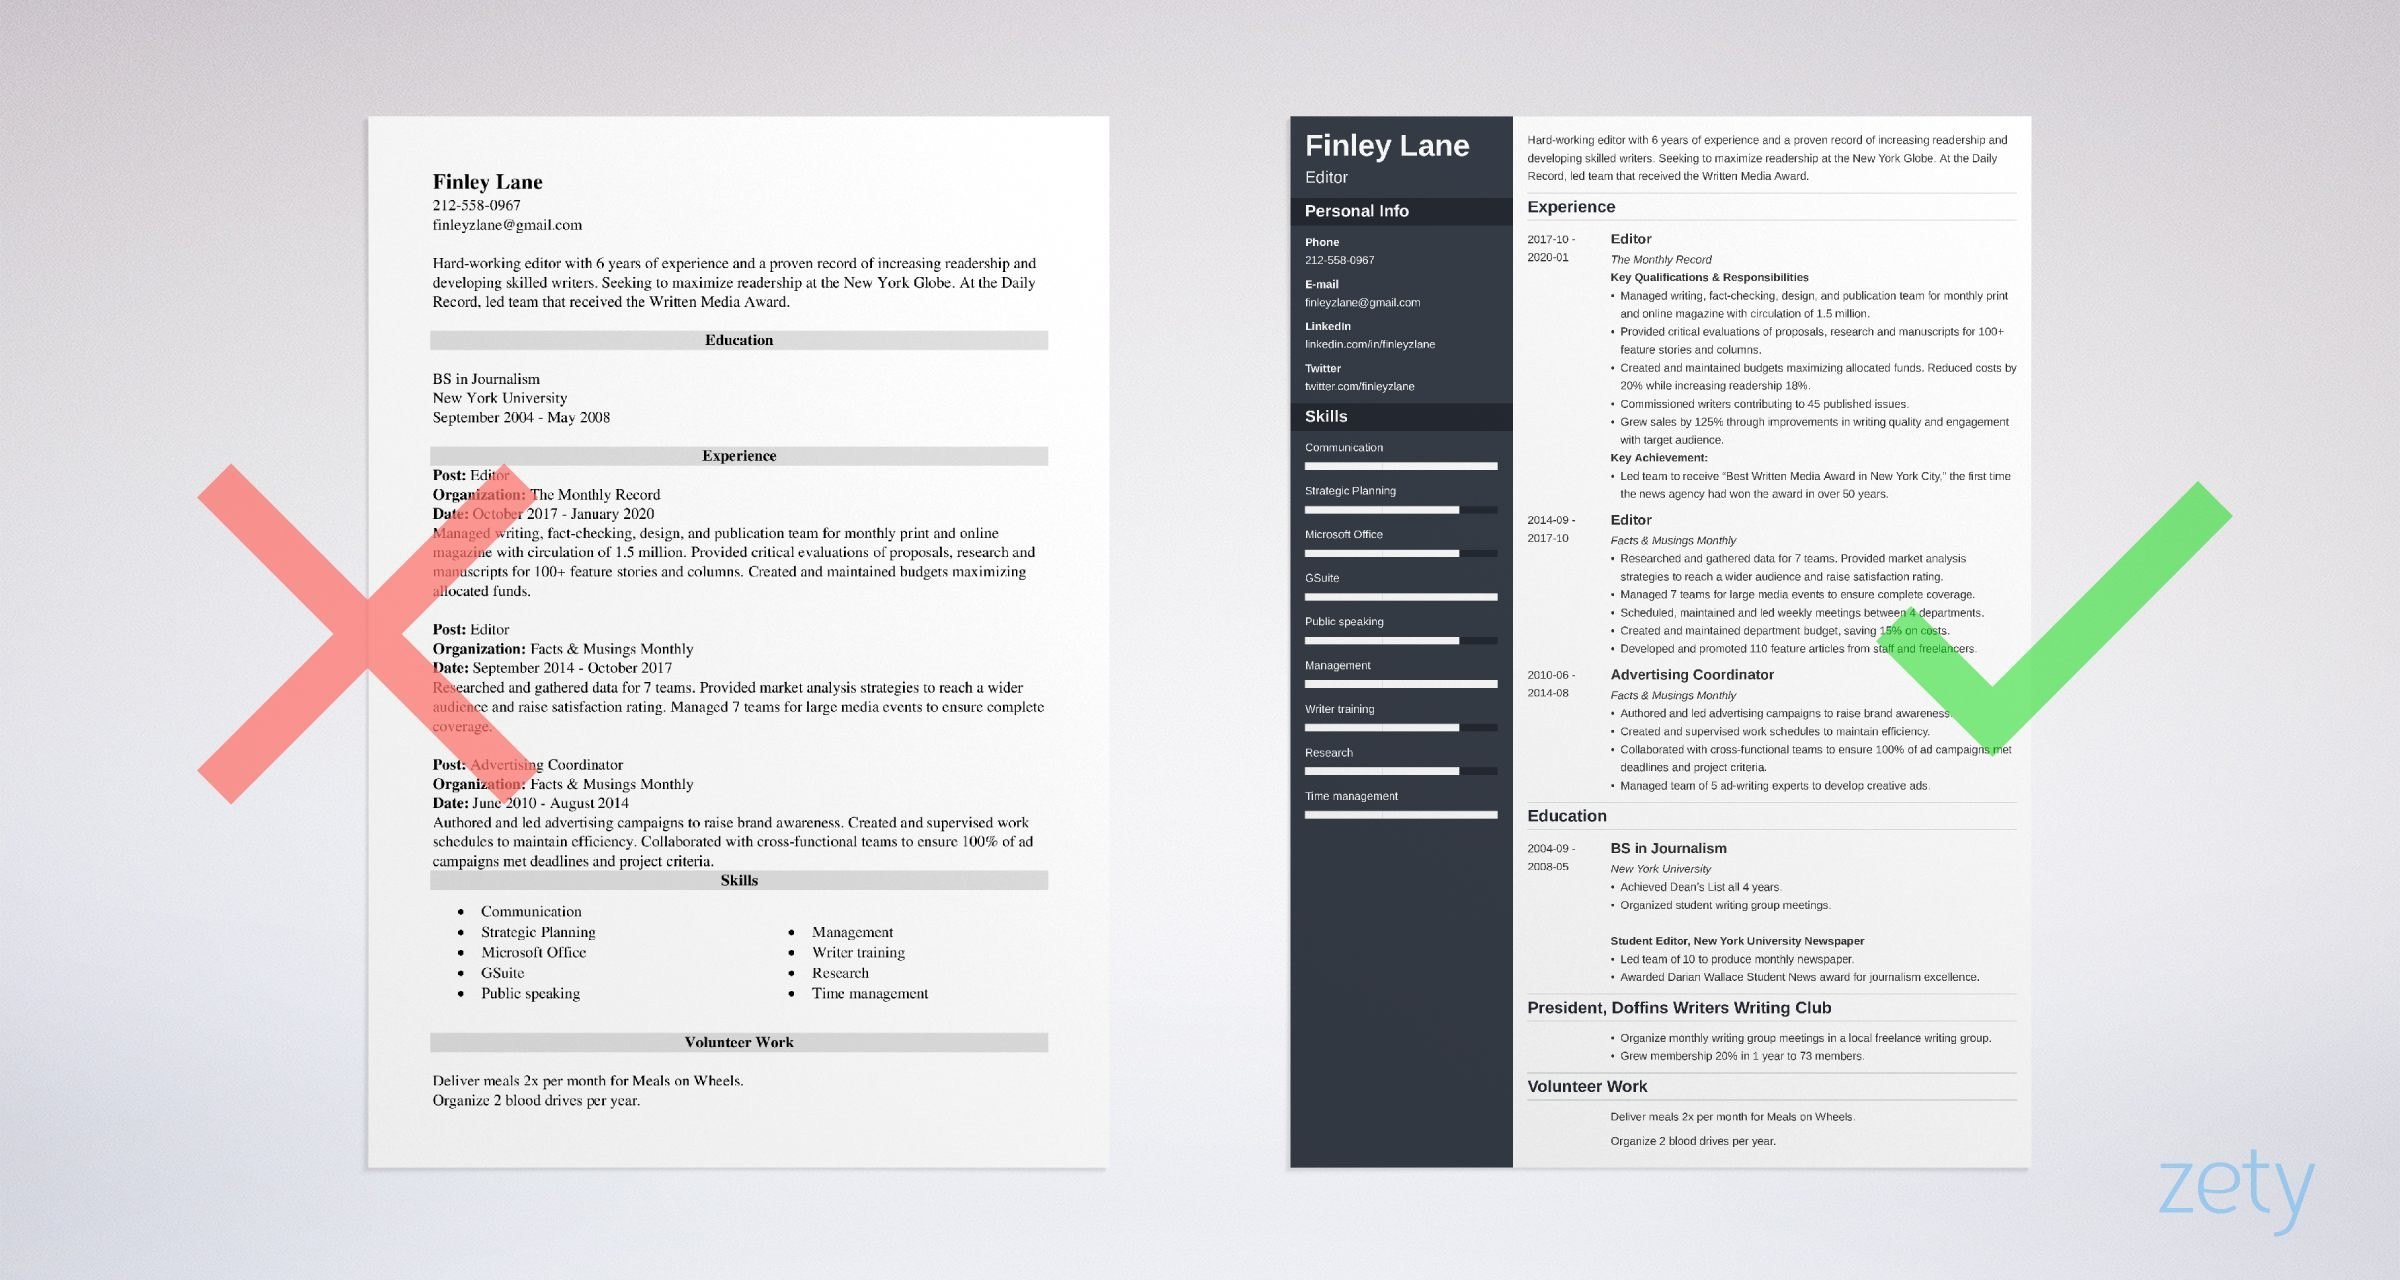 Sample Resume for A Writer Editor Editor Resume: Samples and Writing Guide